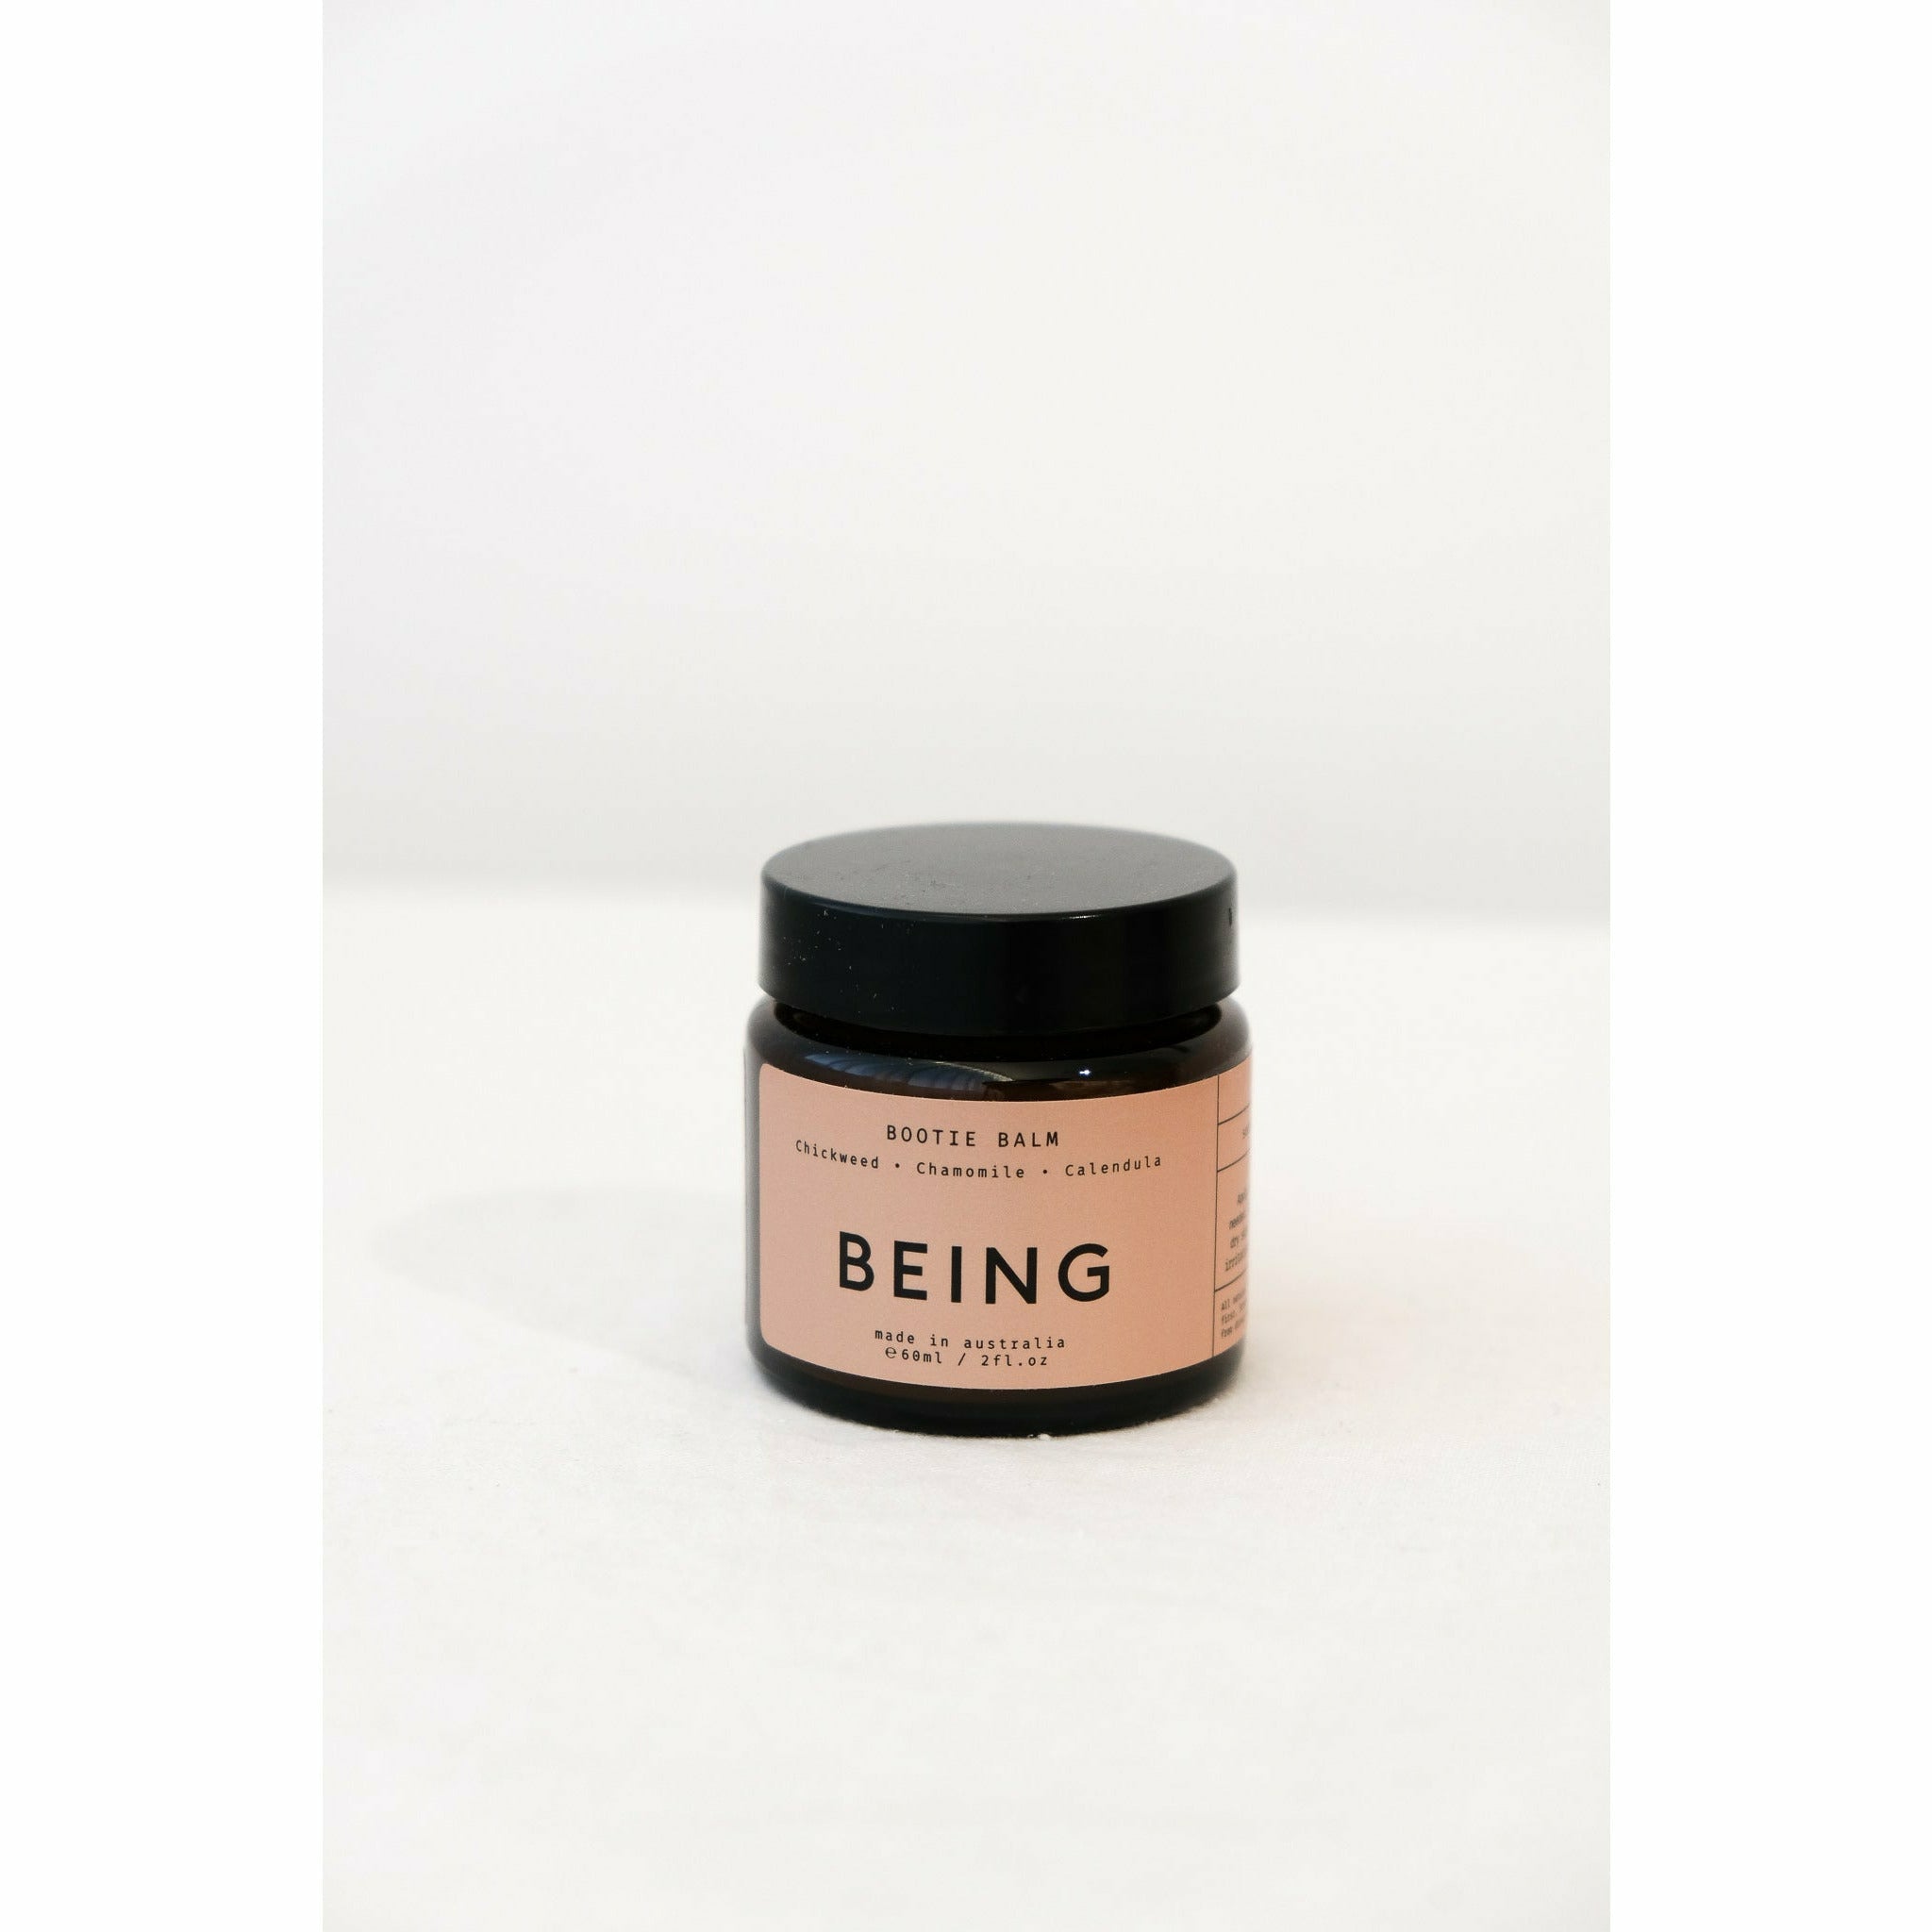 Being Skincare Bootie Balm